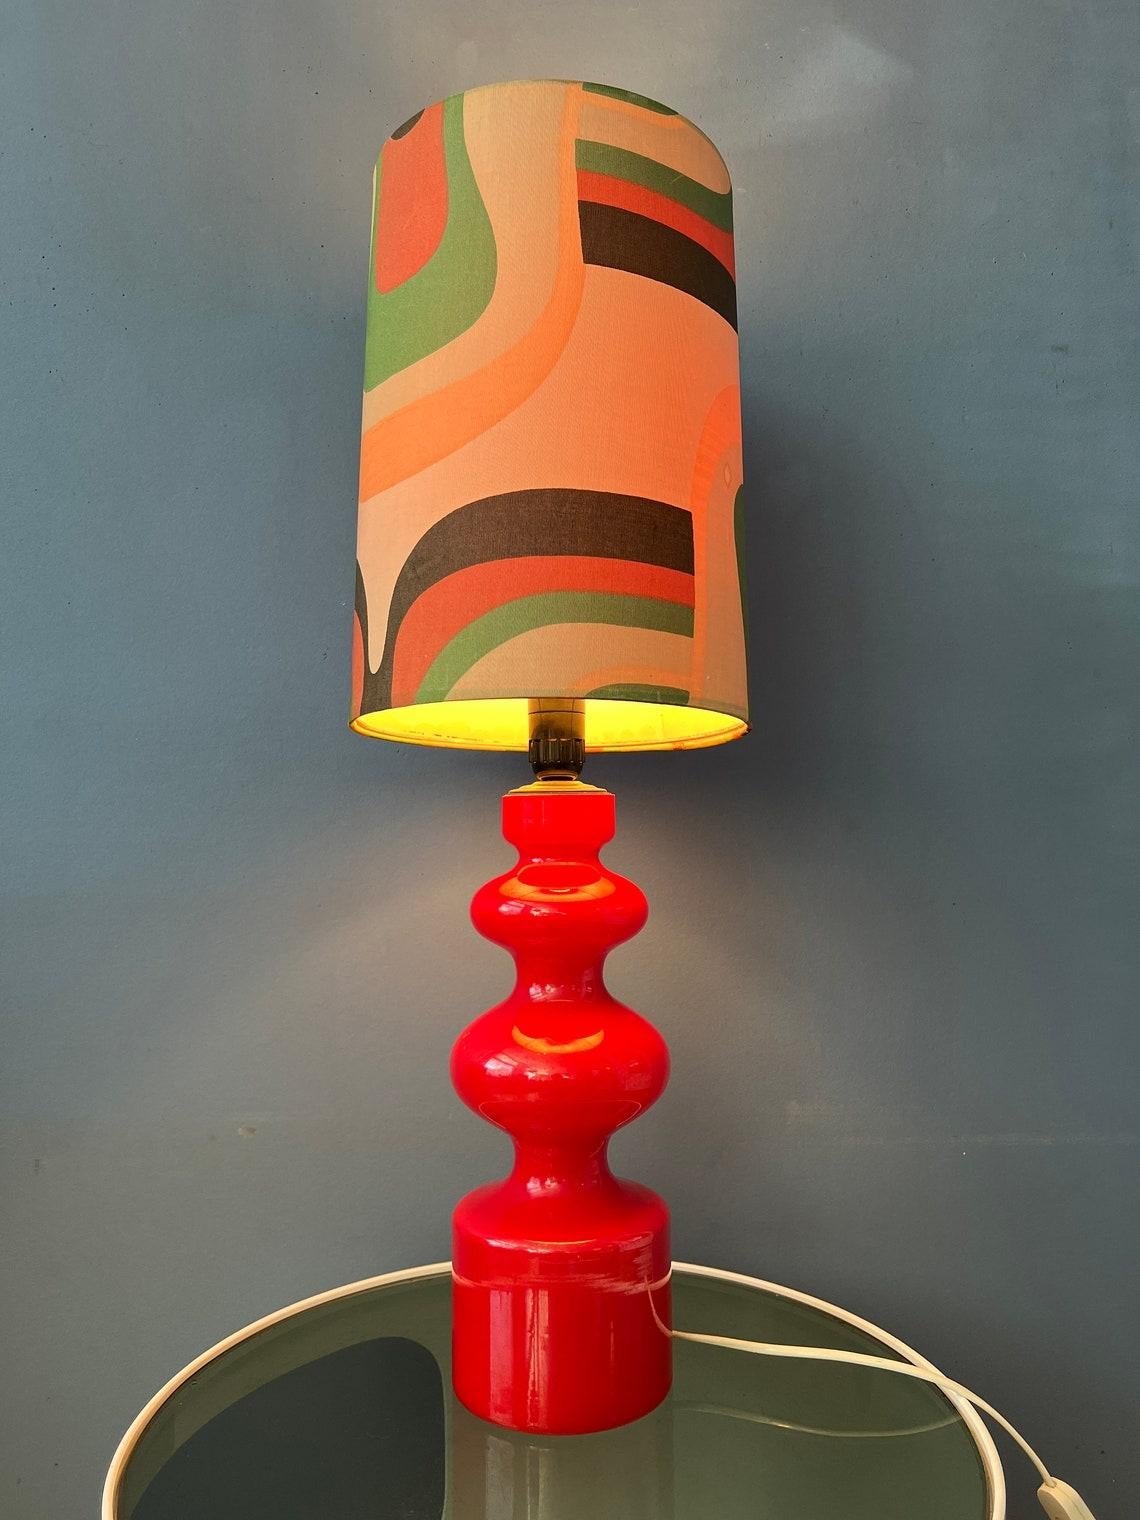 Red west germany space age table lamp with glass base and textile shade. The lamp requires one E27/26 lightbulb and currently has an EU-plug.

Additional information:
Materials: Ceramic, linen
Period: 1970s
Dimensions:ø Shade: 25 cm
Height: 62